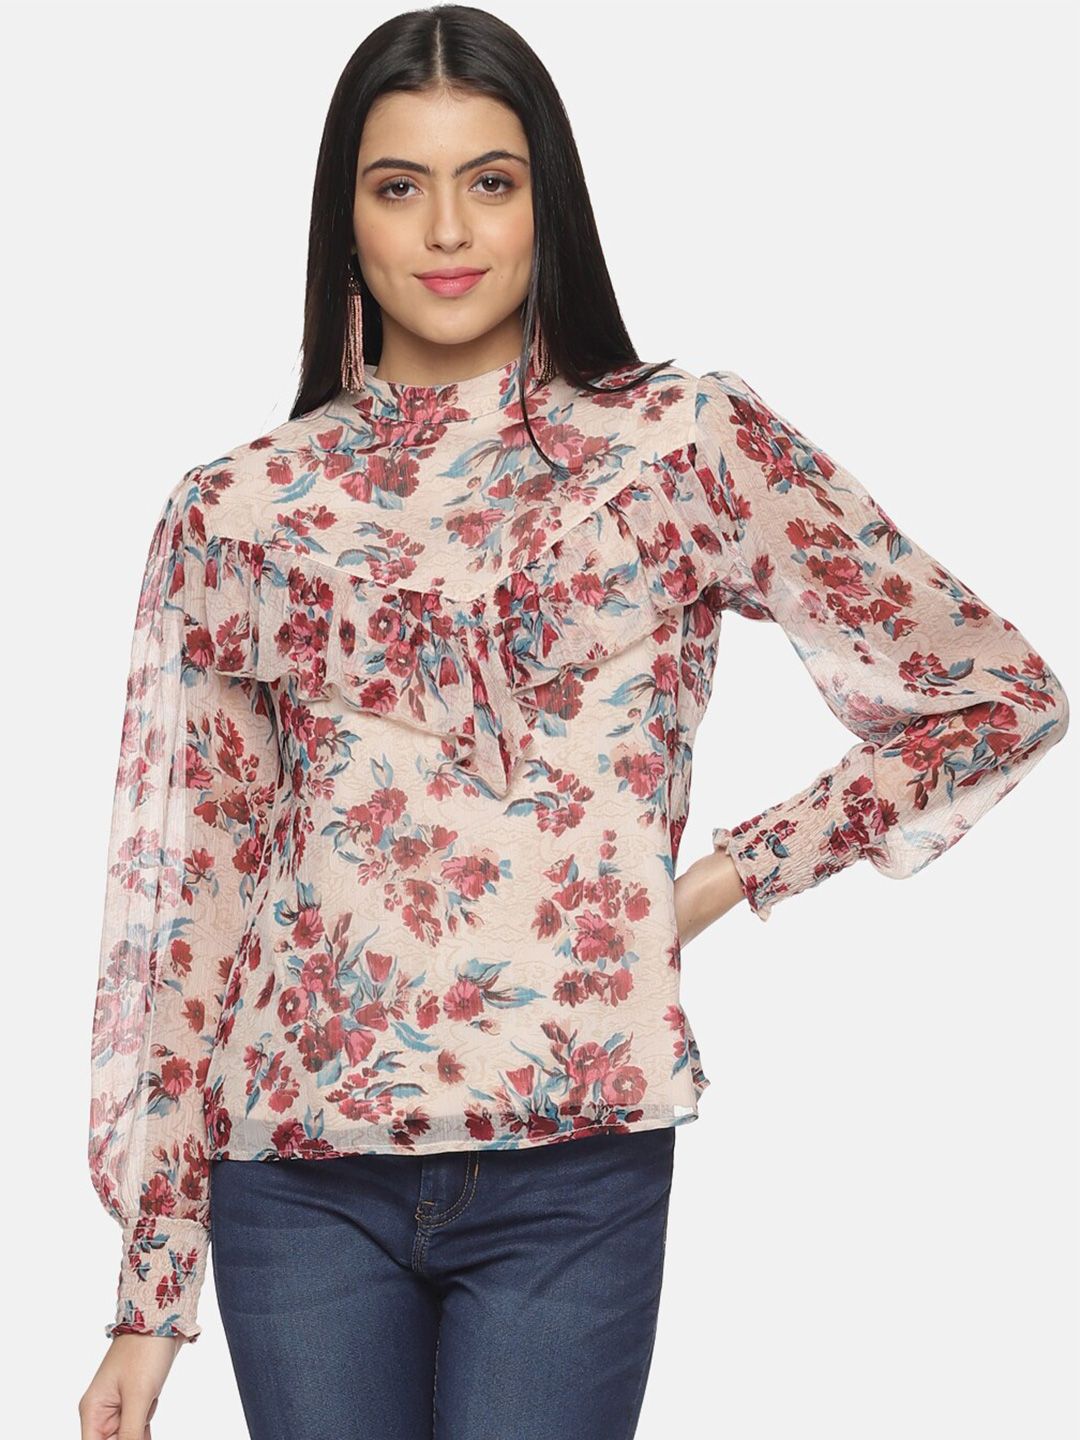 HERE&NOW White & Red Floral Printed Ruffles Chiffon Top Price in India